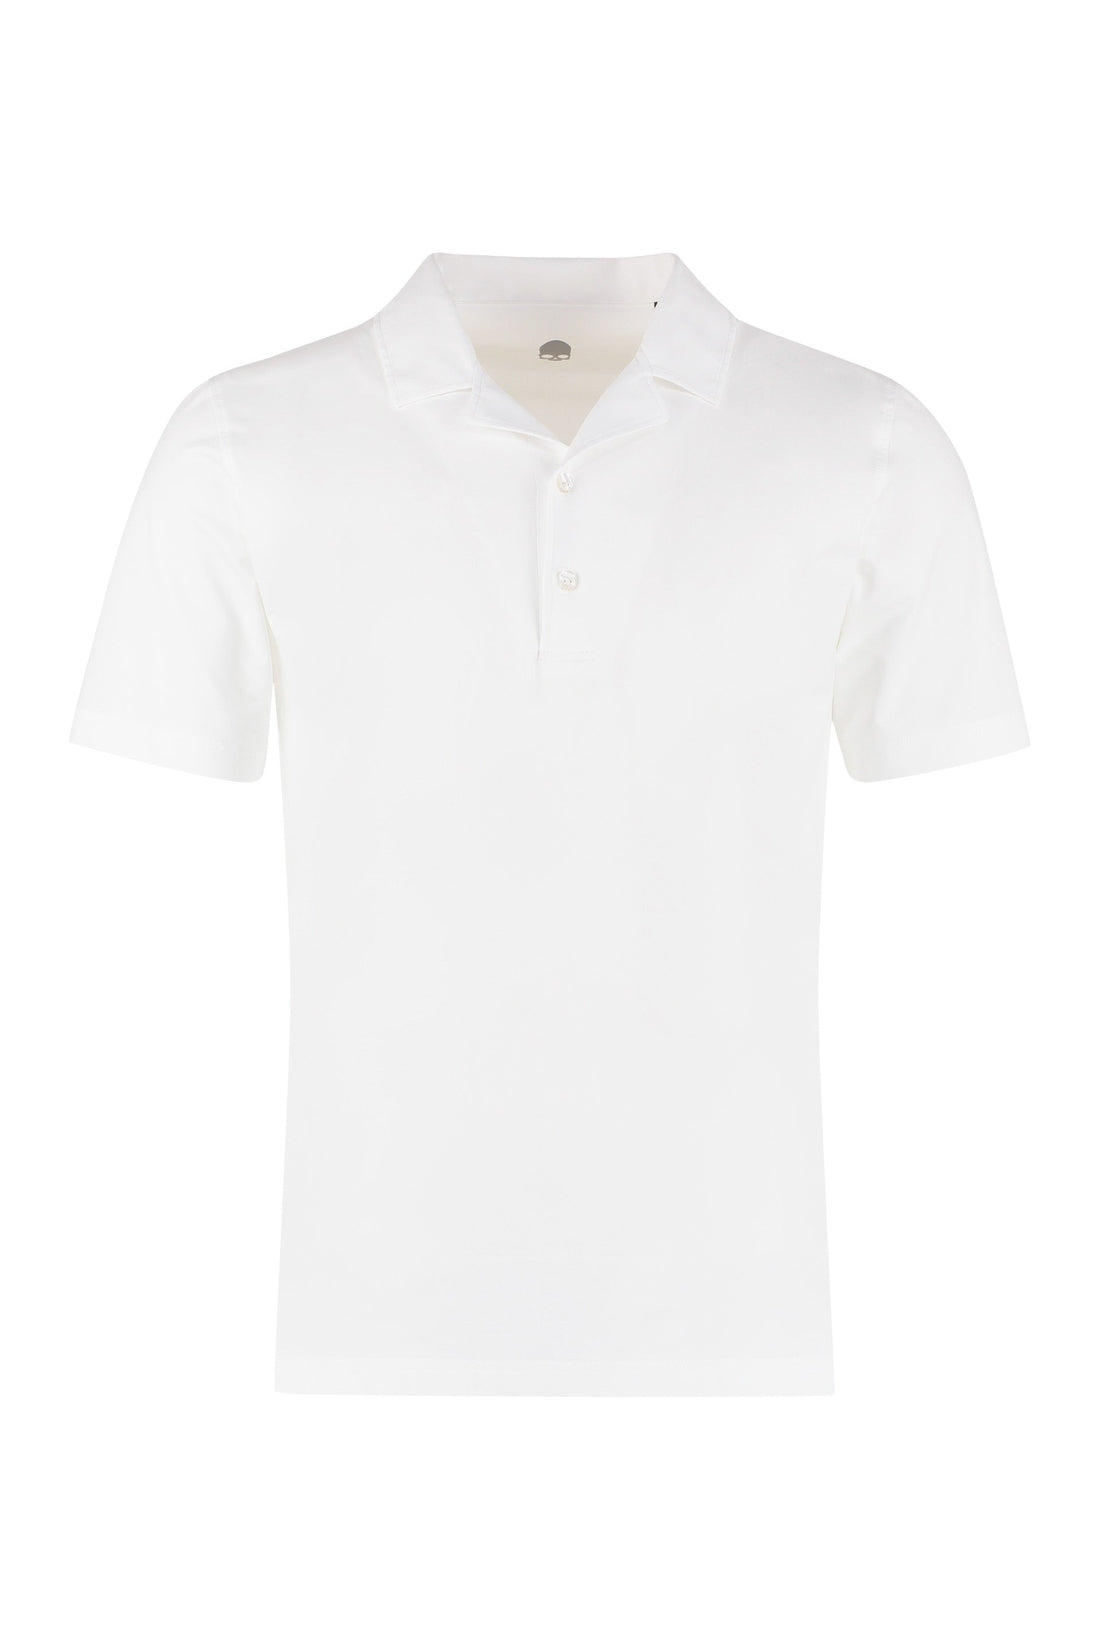 HYDROGEN-OUTLET-SALE-Technical oxford fabric polo shirt-ARCHIVIST